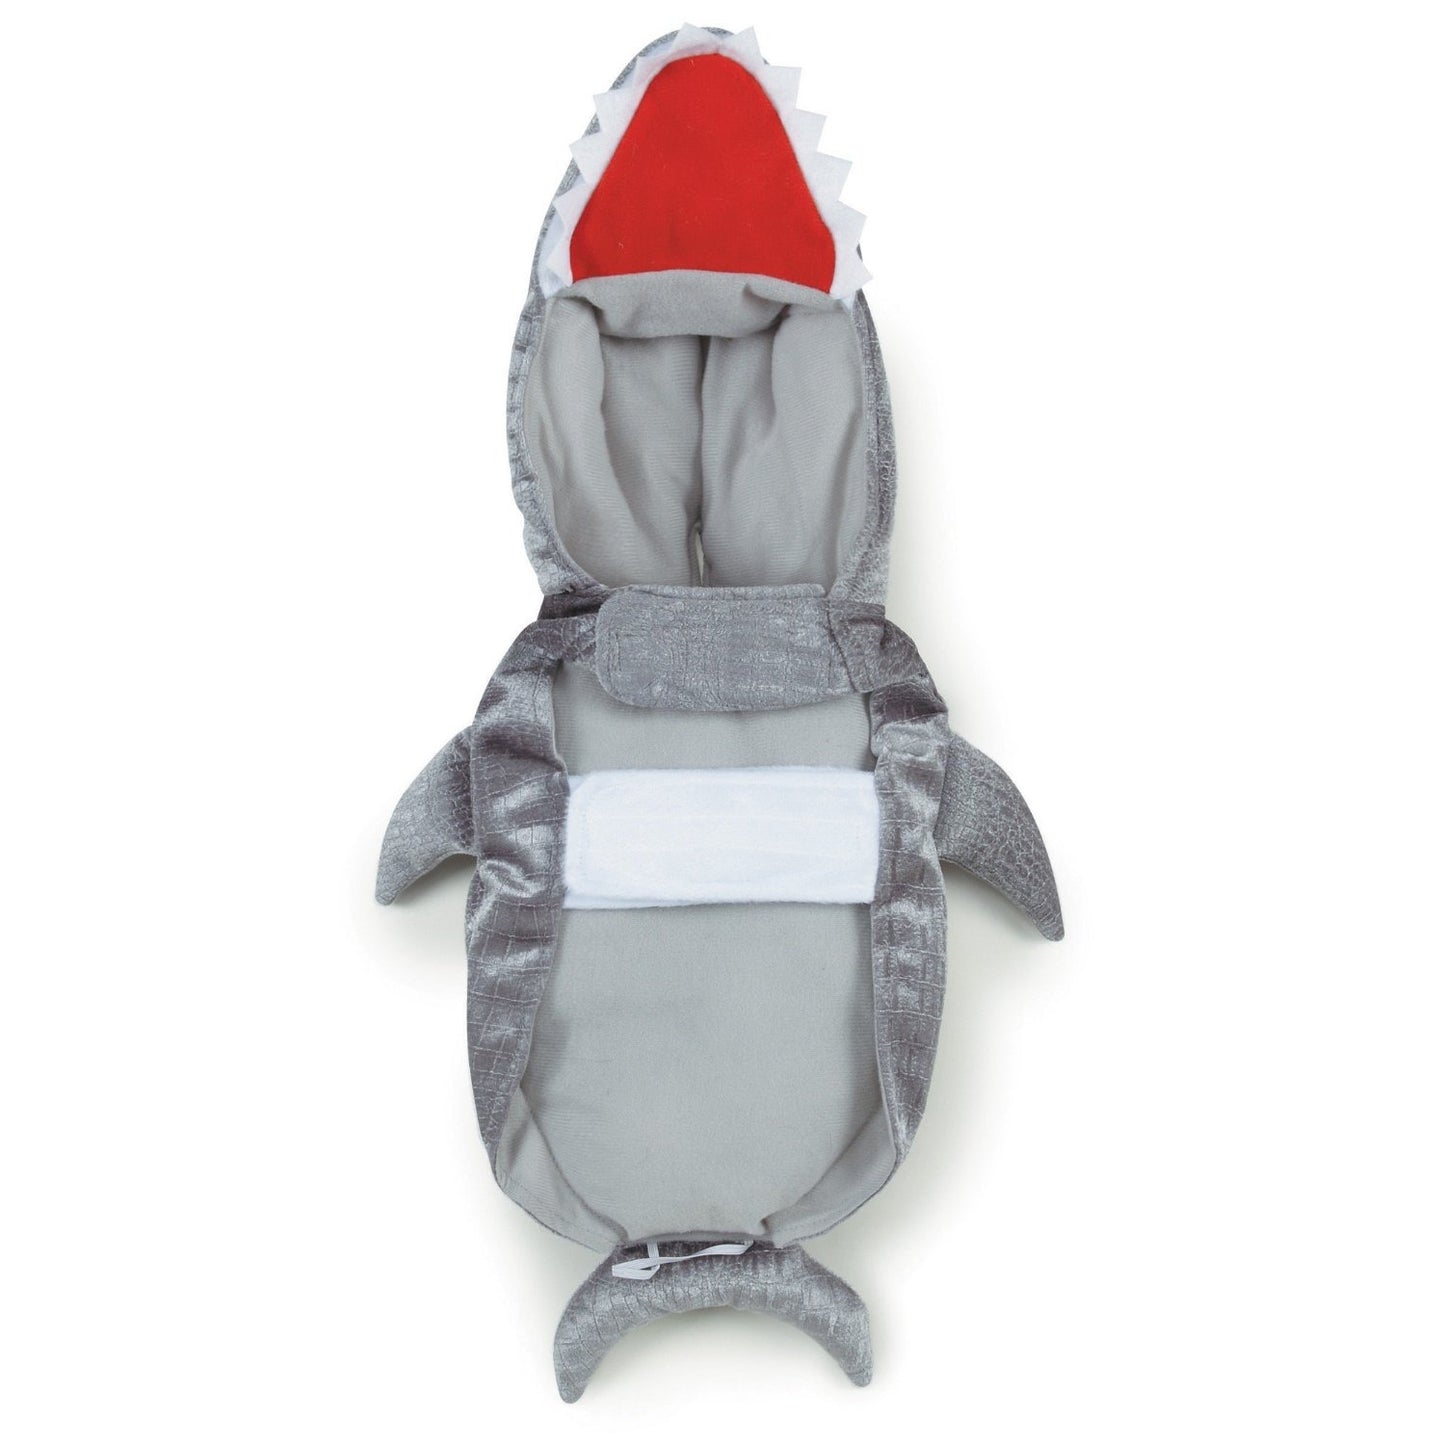 Casual Canine Casual Canine Shark Costume for Dogs, 16" Medium